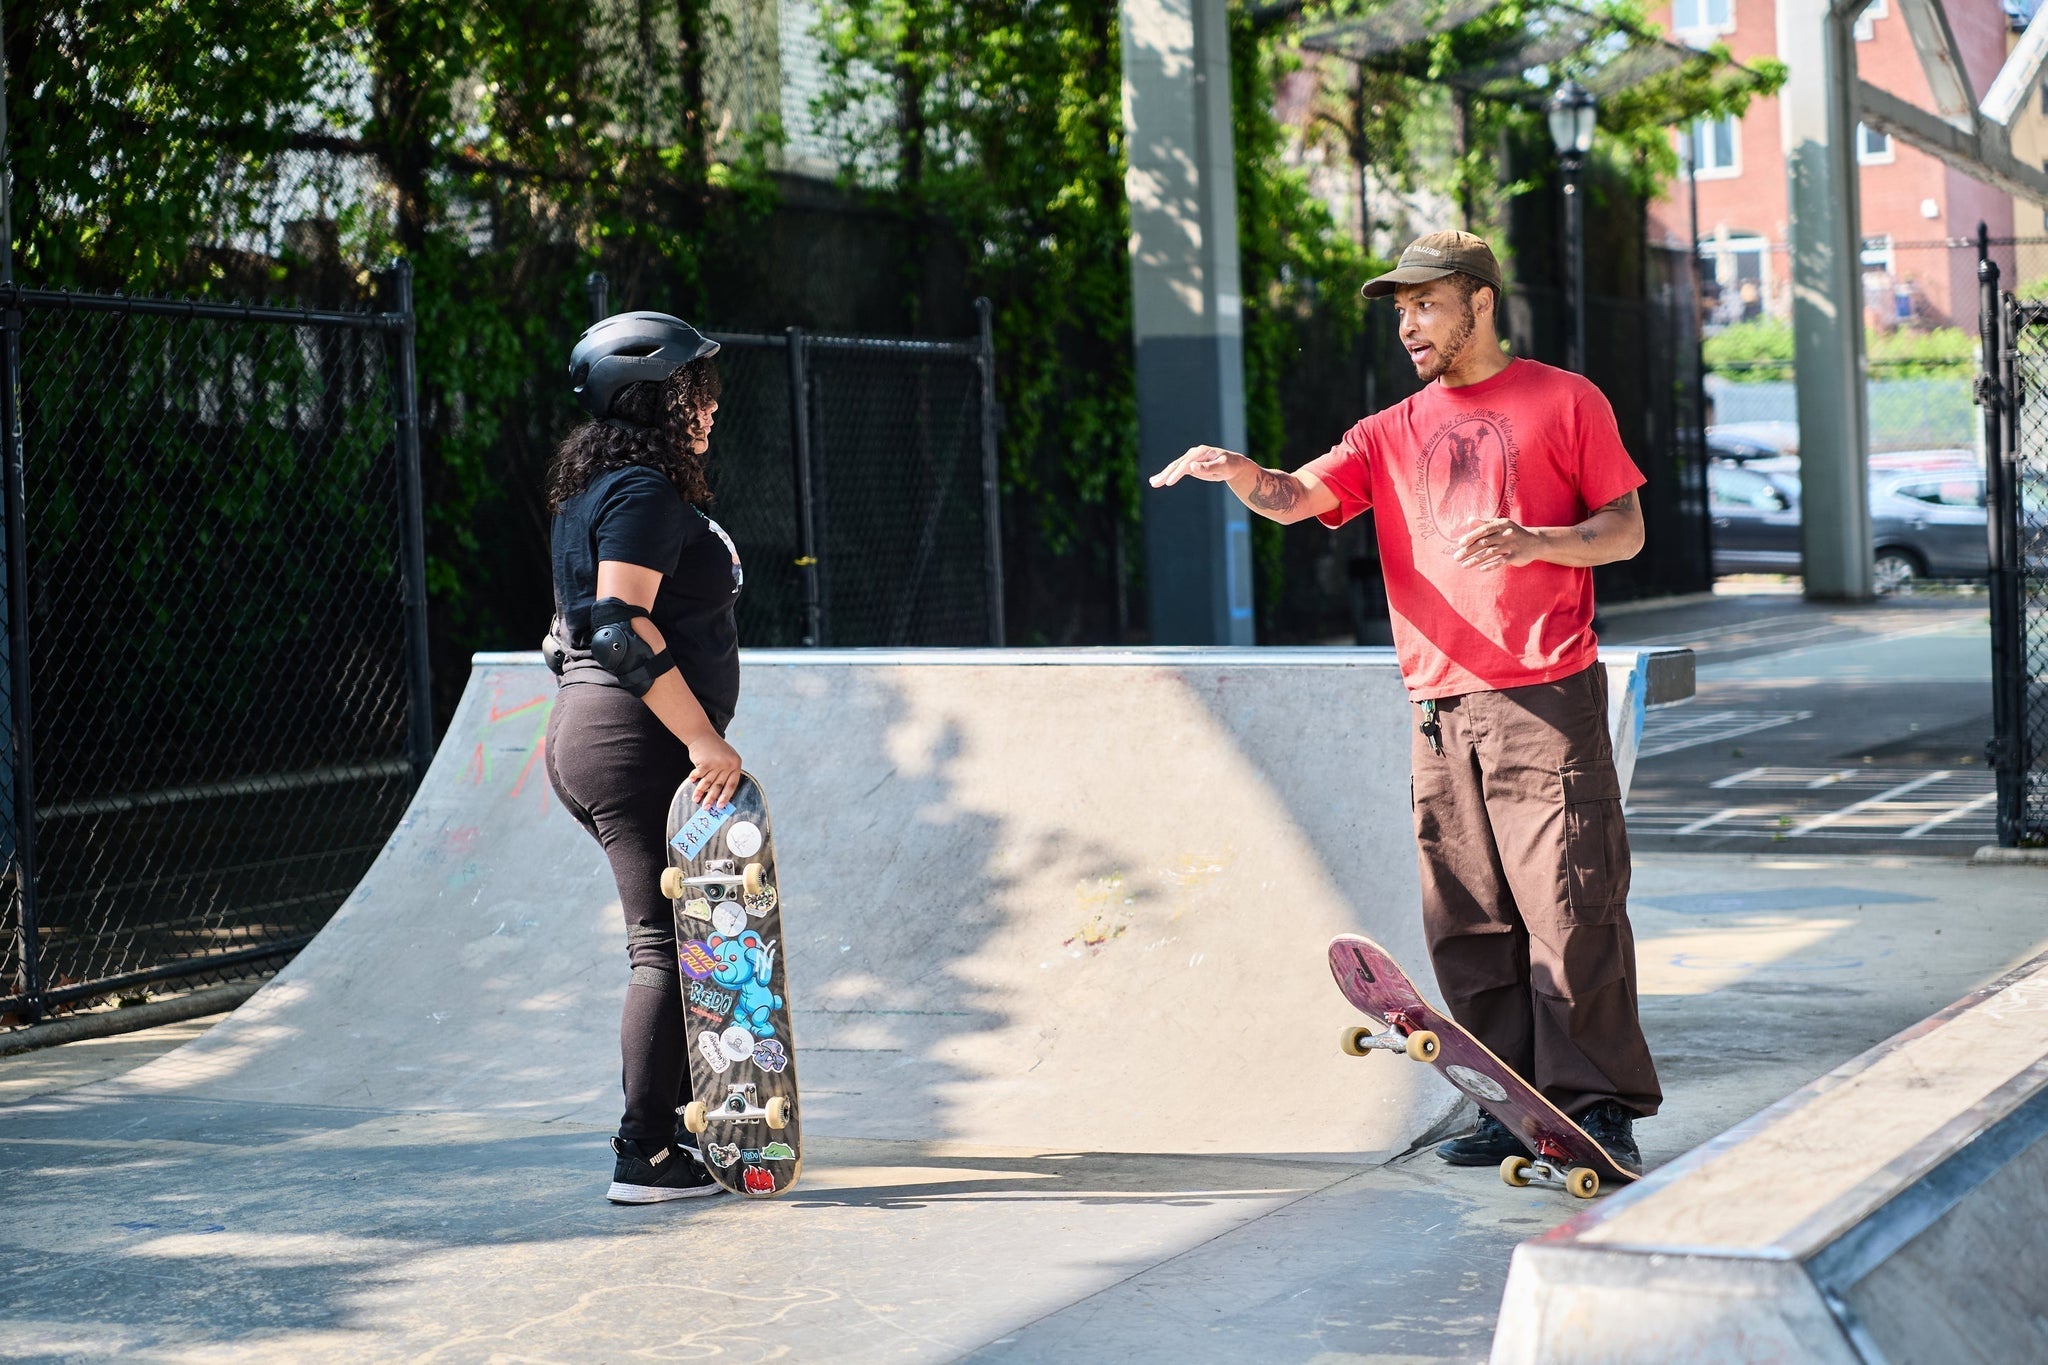 After School Skateboard Lessons @ St. Mary's Playground (April 22 - 26)